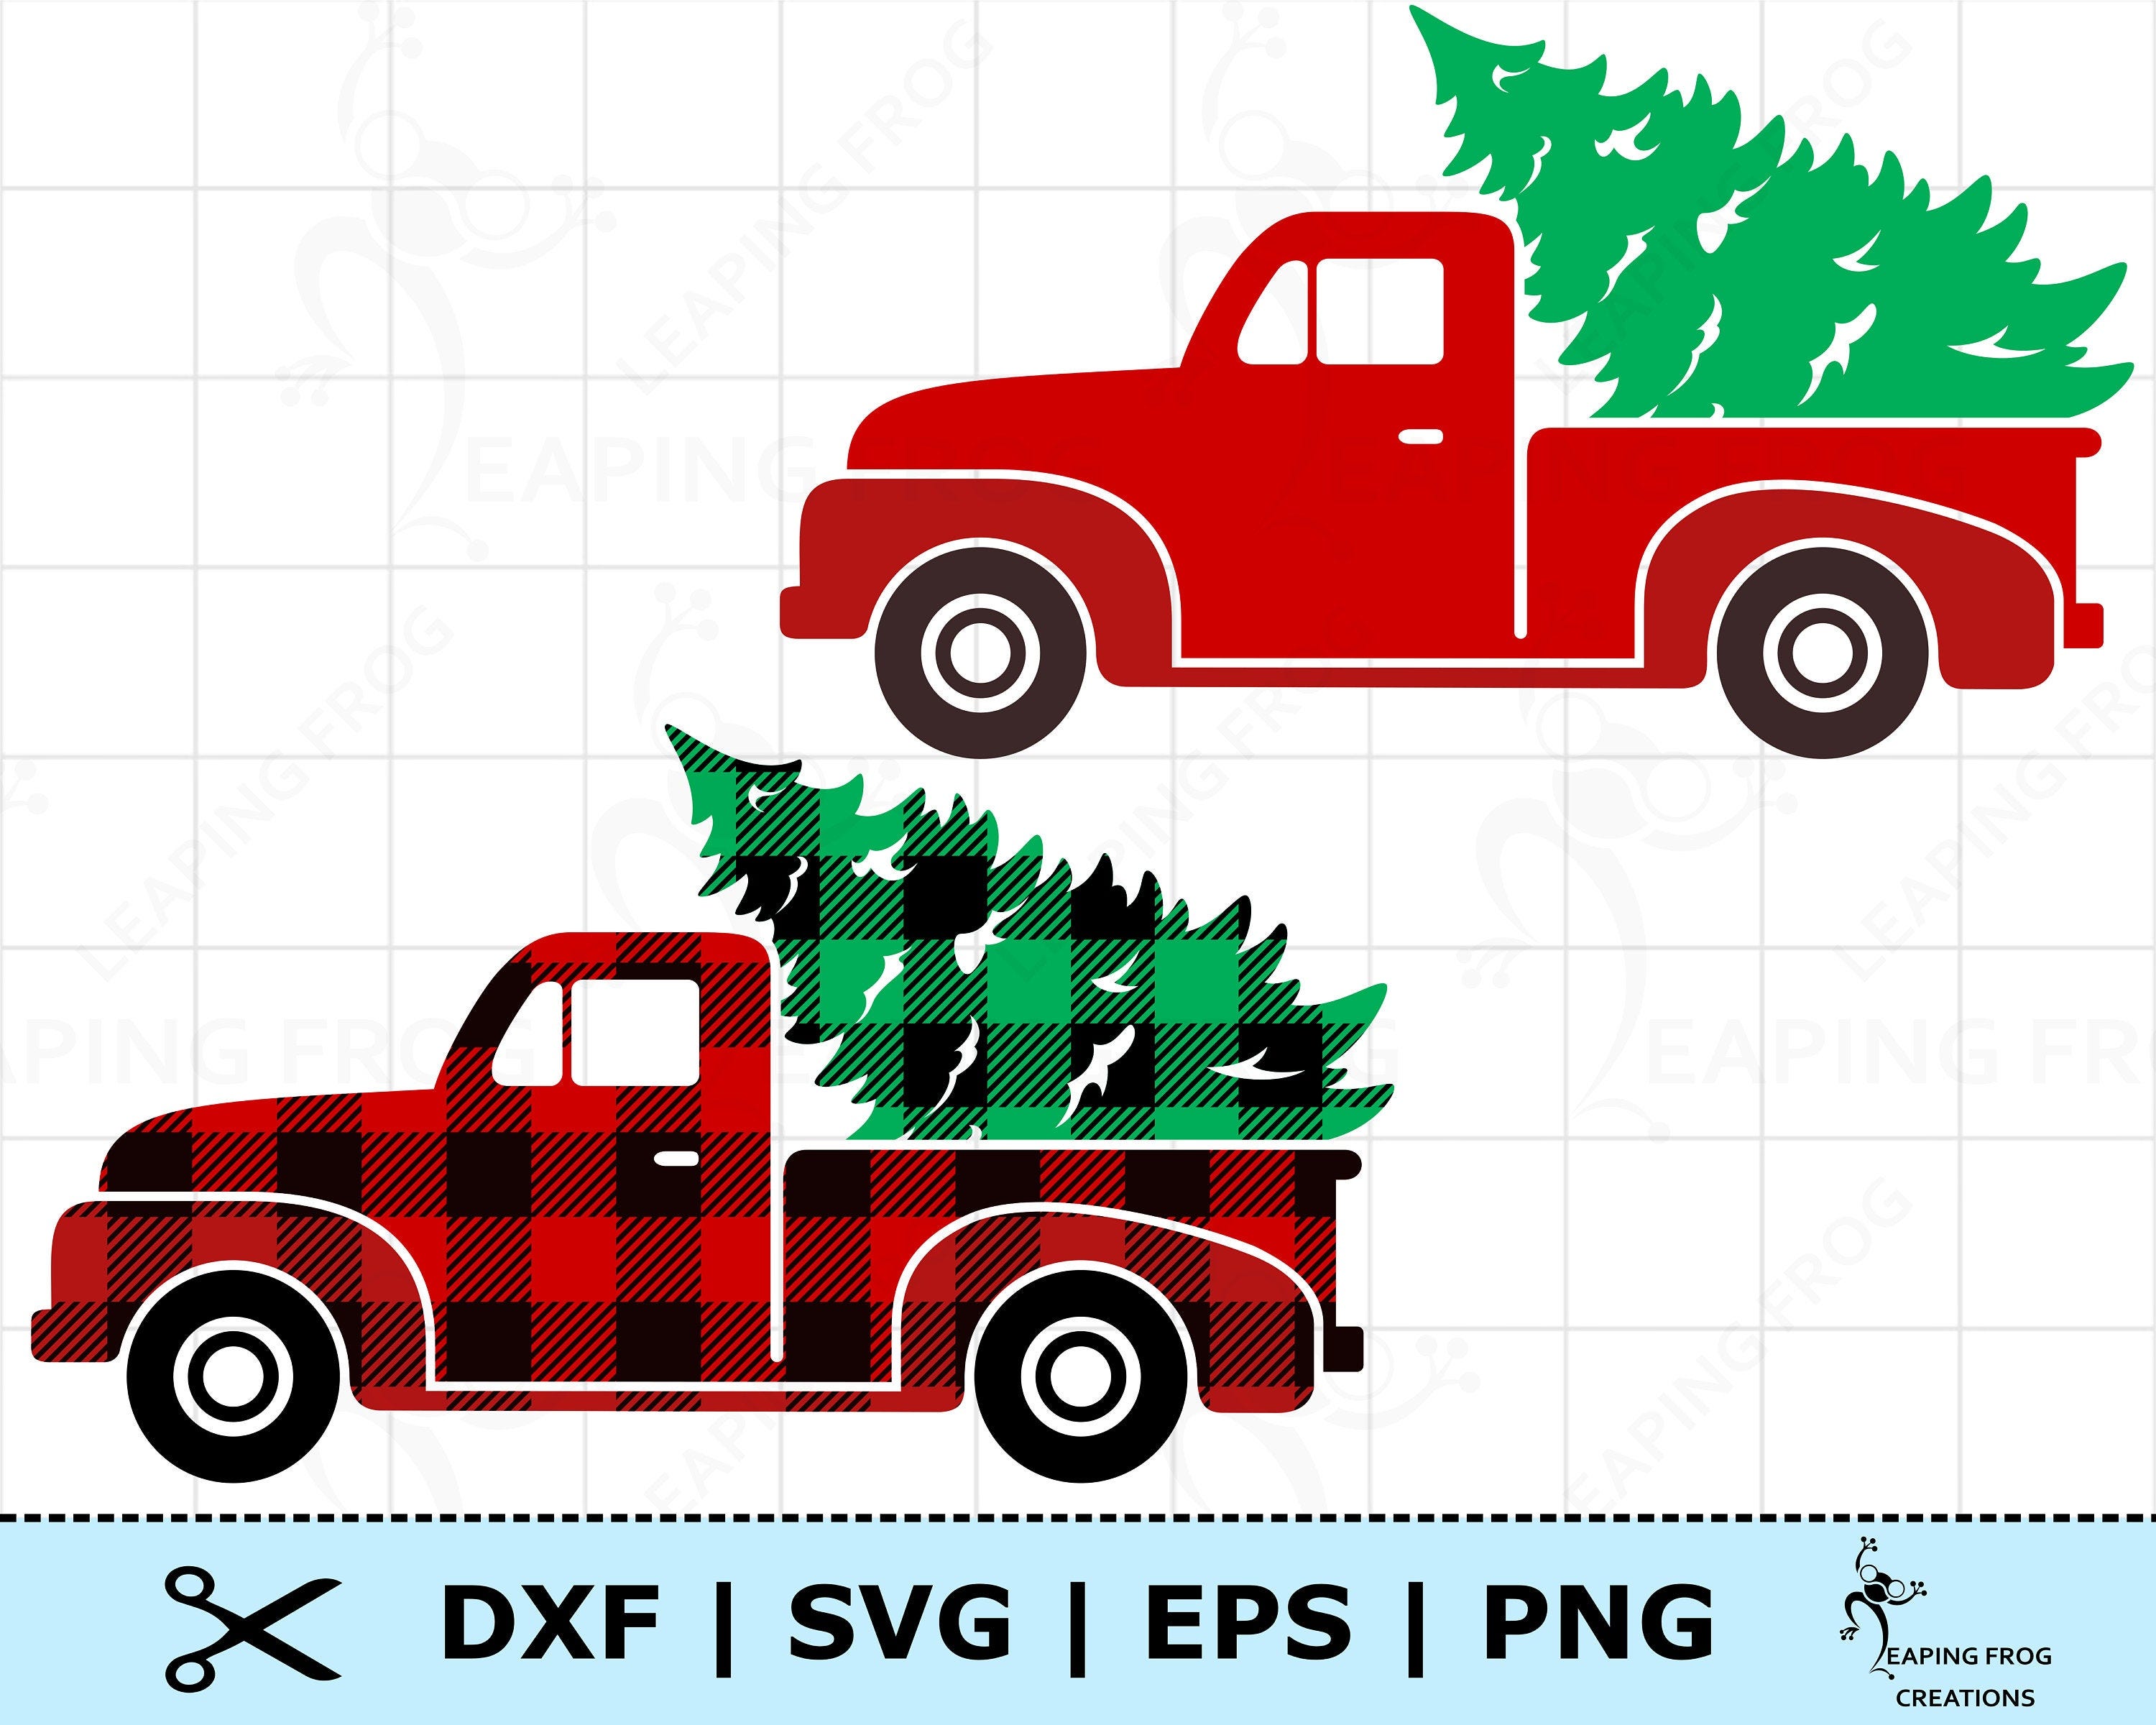 Buffalo Plaid Christmas Truck SVG. PNG. Cricut cut files, layered. Silhouette files. Trees, Red, Black, vintage, DXF, eps. Instant download!